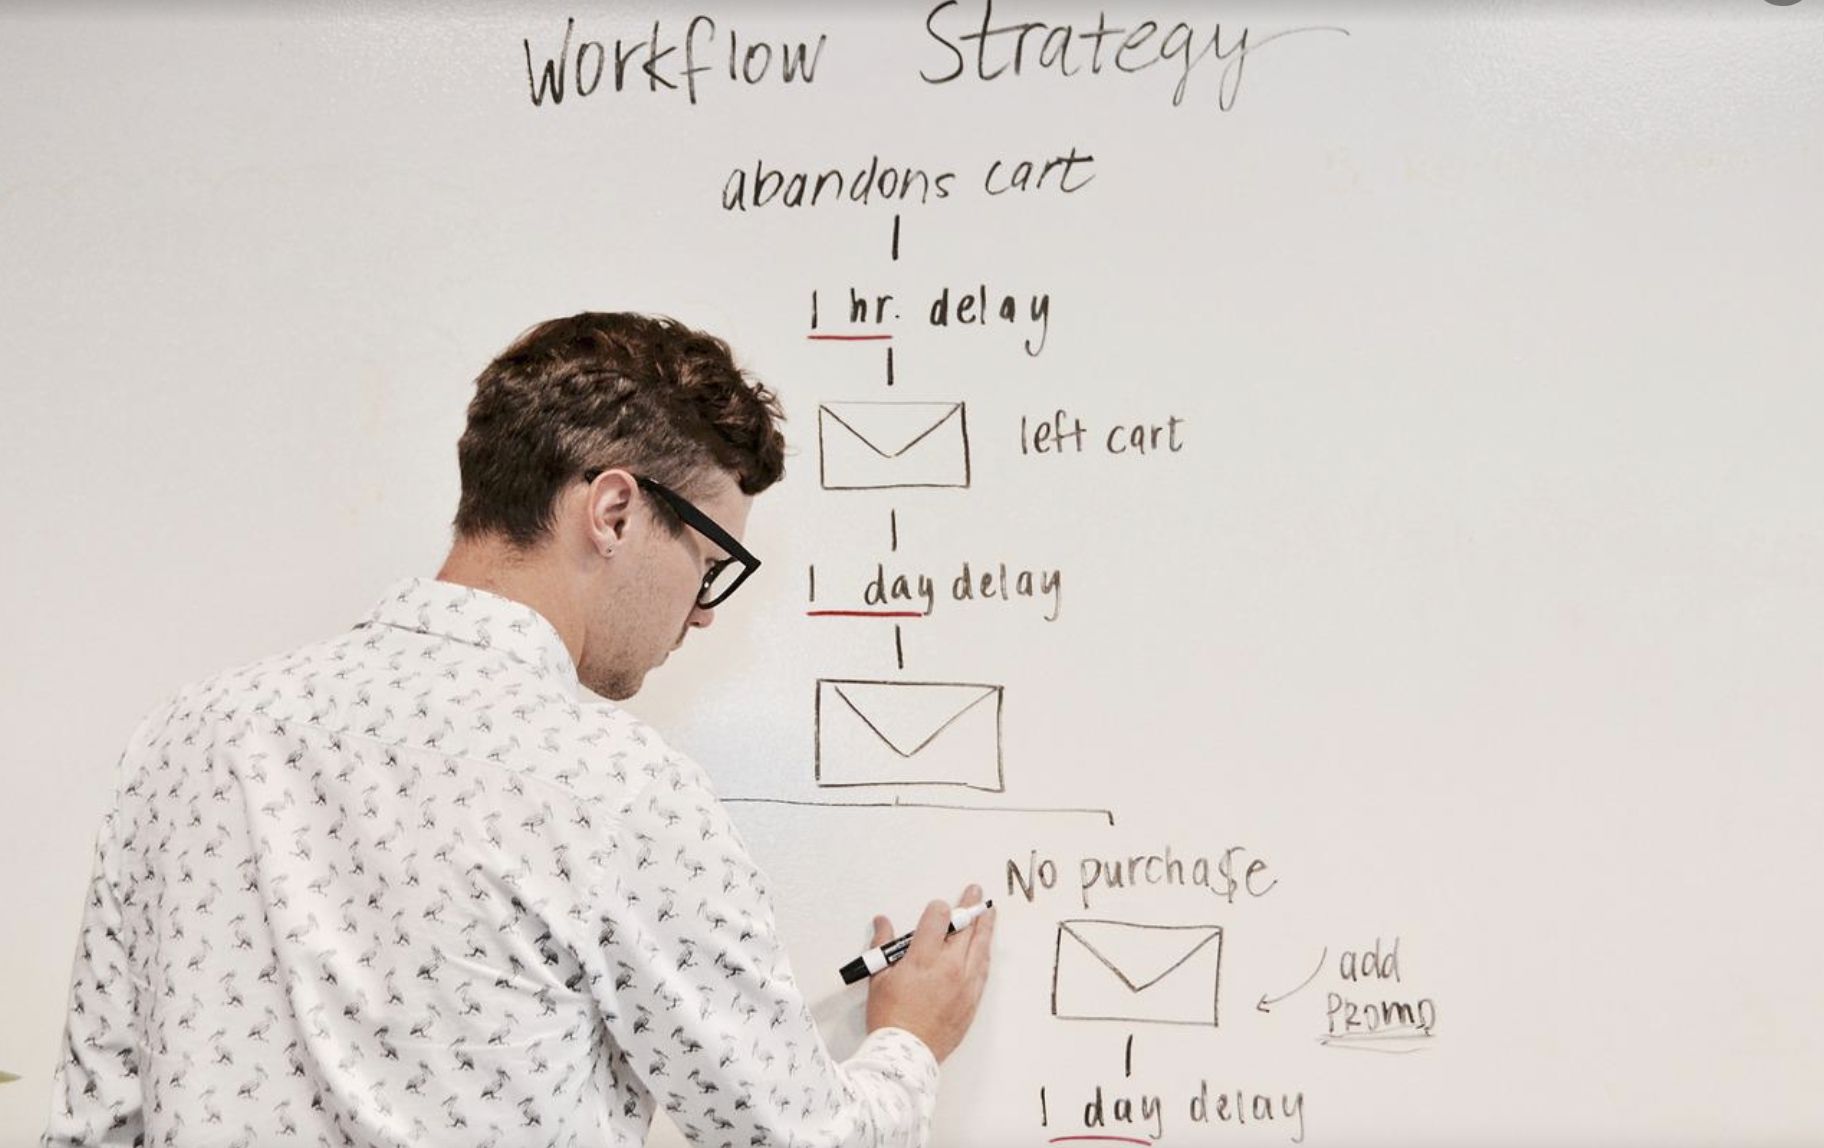 Workflow strategy. A man writing on a desk.